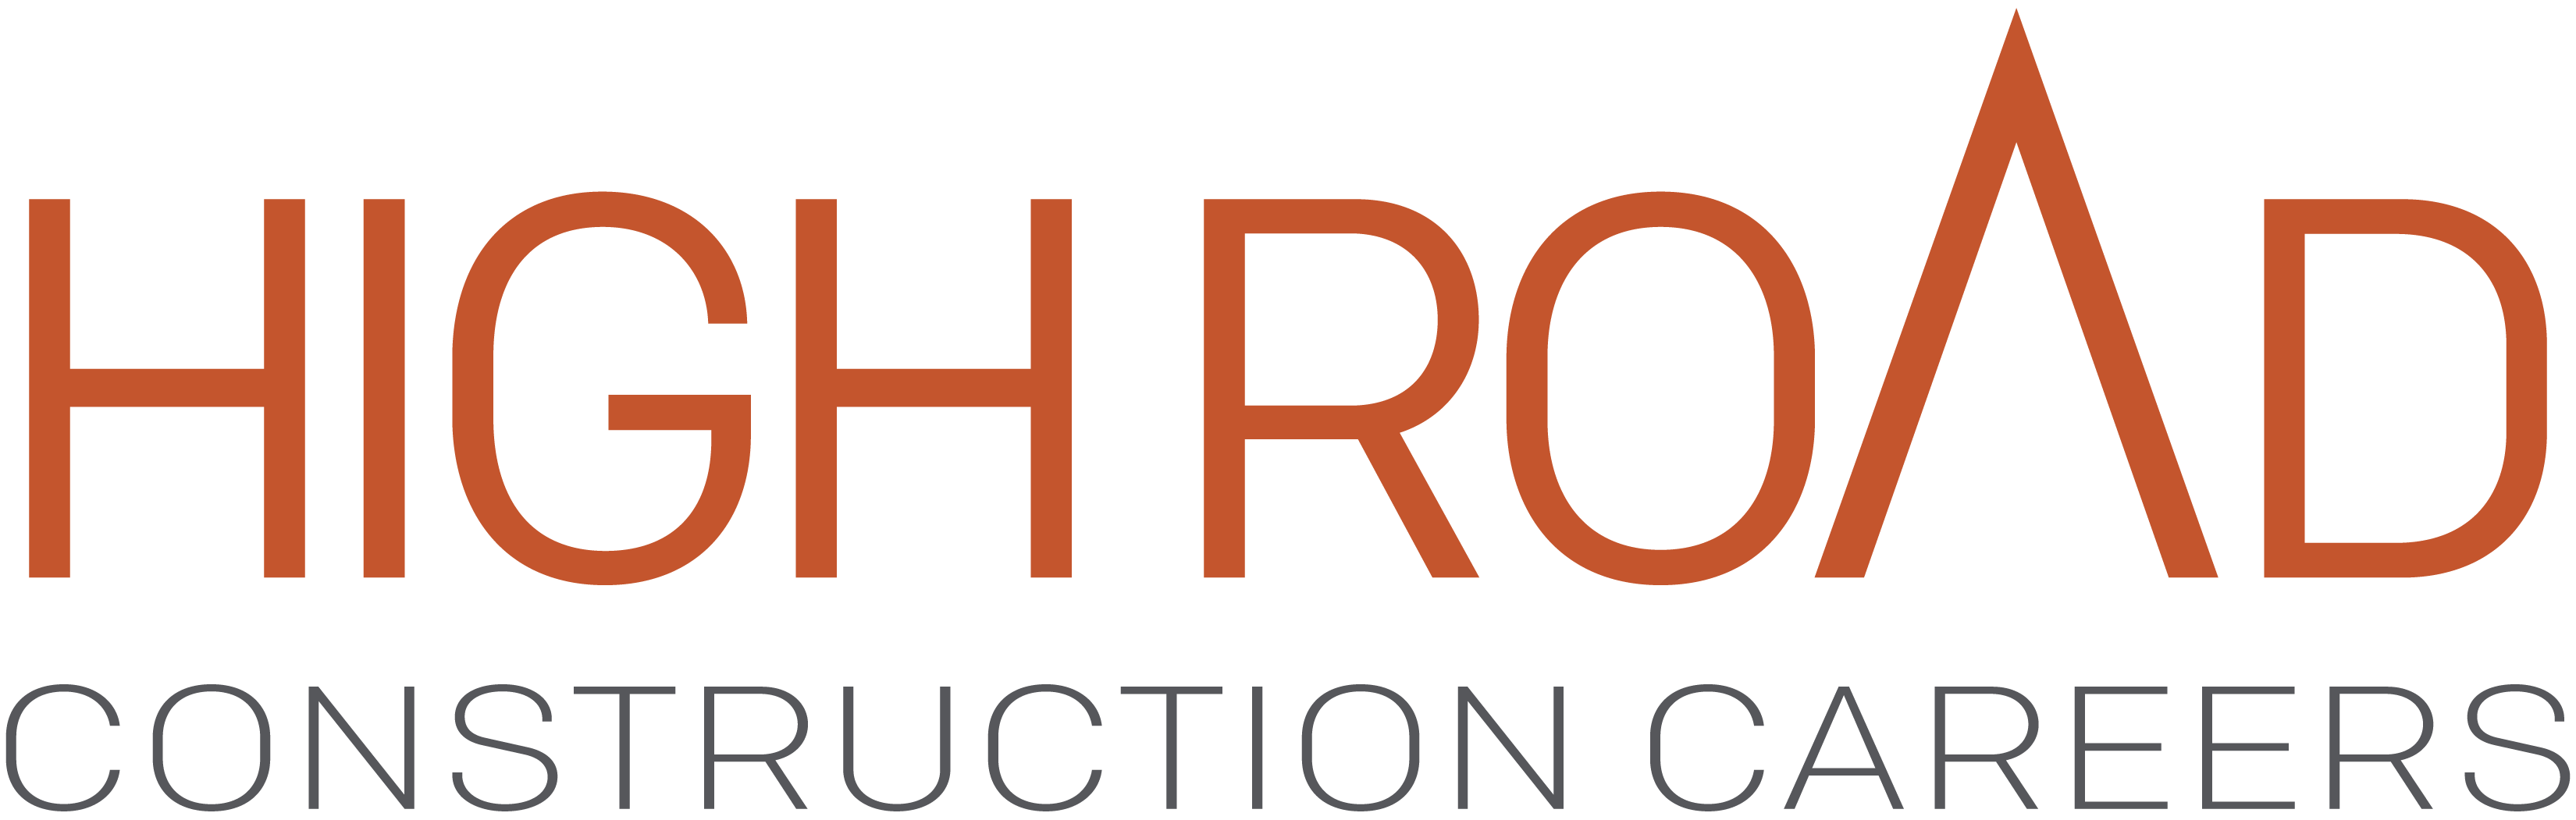 High Road Construction Careers logo